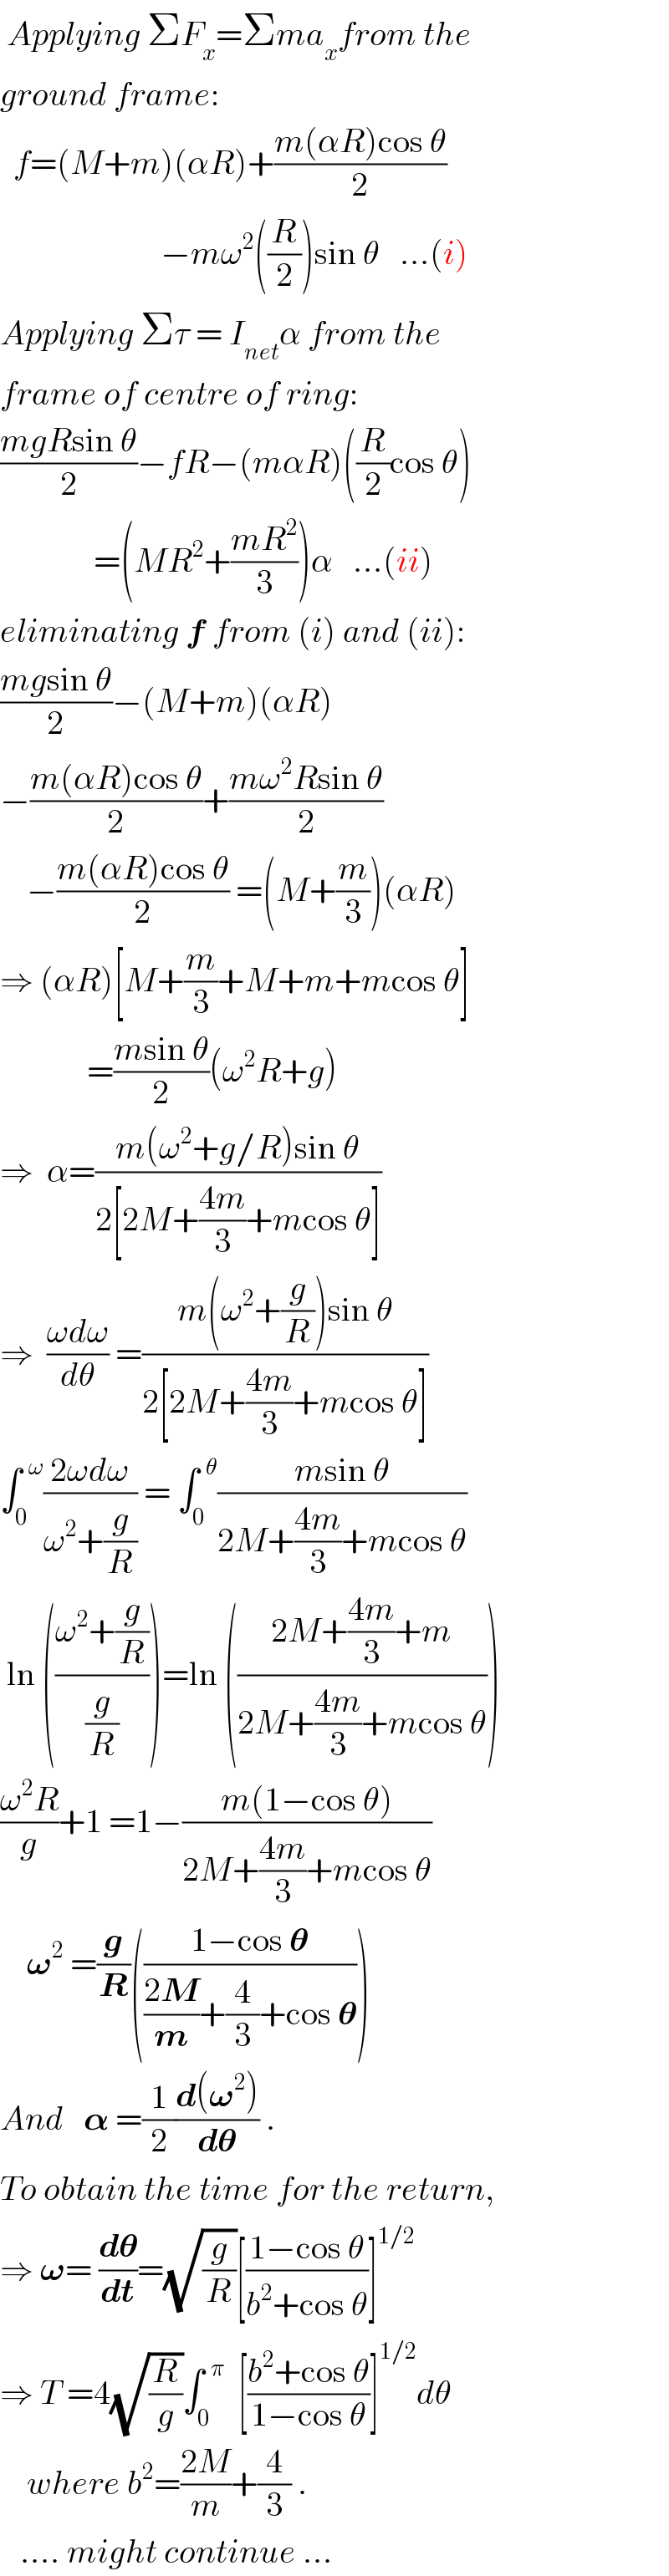  Applying ΣF_x =Σma_x from the  ground frame:    f=(M+m)(αR)+((m(αR)cos θ)/2)                          −mω^2 ((R/2))sin θ   ...(i)  Applying Στ = I_(net) α from the  frame of centre of ring:  ((mgRsin θ)/2)−fR−(mαR)((R/2)cos θ)                =(MR^2 +((mR^2 )/3))α   ...(ii)  eliminating f from (i) and (ii):  ((mgsin θ)/2)−(M+m)(αR)  −((m(αR)cos θ)/2)+((mω^2 Rsin θ)/2)      −((m(αR)cos θ)/2) =(M+(m/3))(αR)  ⇒ (αR)[M+(m/3)+M+m+mcos θ]               =((msin θ)/2)(ω^2 R+g)  ⇒  α=((m(ω^2 +g/R)sin θ)/(2[2M+((4m)/3)+mcos θ]))  ⇒  ((ωdω)/dθ) =((m(ω^2 +(g/R))sin θ)/(2[2M+((4m)/3)+mcos θ]))  ∫_0 ^(  ω) ((2ωdω)/(ω^2 +(g/R))) = ∫_0 ^(  θ) ((msin θ)/(2M+((4m)/3)+mcos θ))   ln (((ω^2 +(g/R))/(g/R)))=ln (((2M+((4m)/3)+m)/(2M+((4m)/3)+mcos θ)))  ((ω^2 R)/g)+1 =1−((m(1−cos θ))/(2M+((4m)/3)+mcos θ))      𝛚^2  =(g/R)(((1−cos 𝛉)/(((2M)/m)+(4/3)+cos 𝛉)))  And   𝛂 =(1/2)((d(𝛚^2 ))/d𝛉) .  To obtain the time for the return,  ⇒ 𝛚= (d𝛉/dt)=(√(g/R))[((1−cos θ)/(b^2 +cos θ))]^(1/2)   ⇒ T =4(√(R/g))∫_0 ^(  π)   [((b^2 +cos θ)/(1−cos θ))]^(1/2) dθ      where b^2 =((2M)/m)+(4/3) .     .... might continue ...  